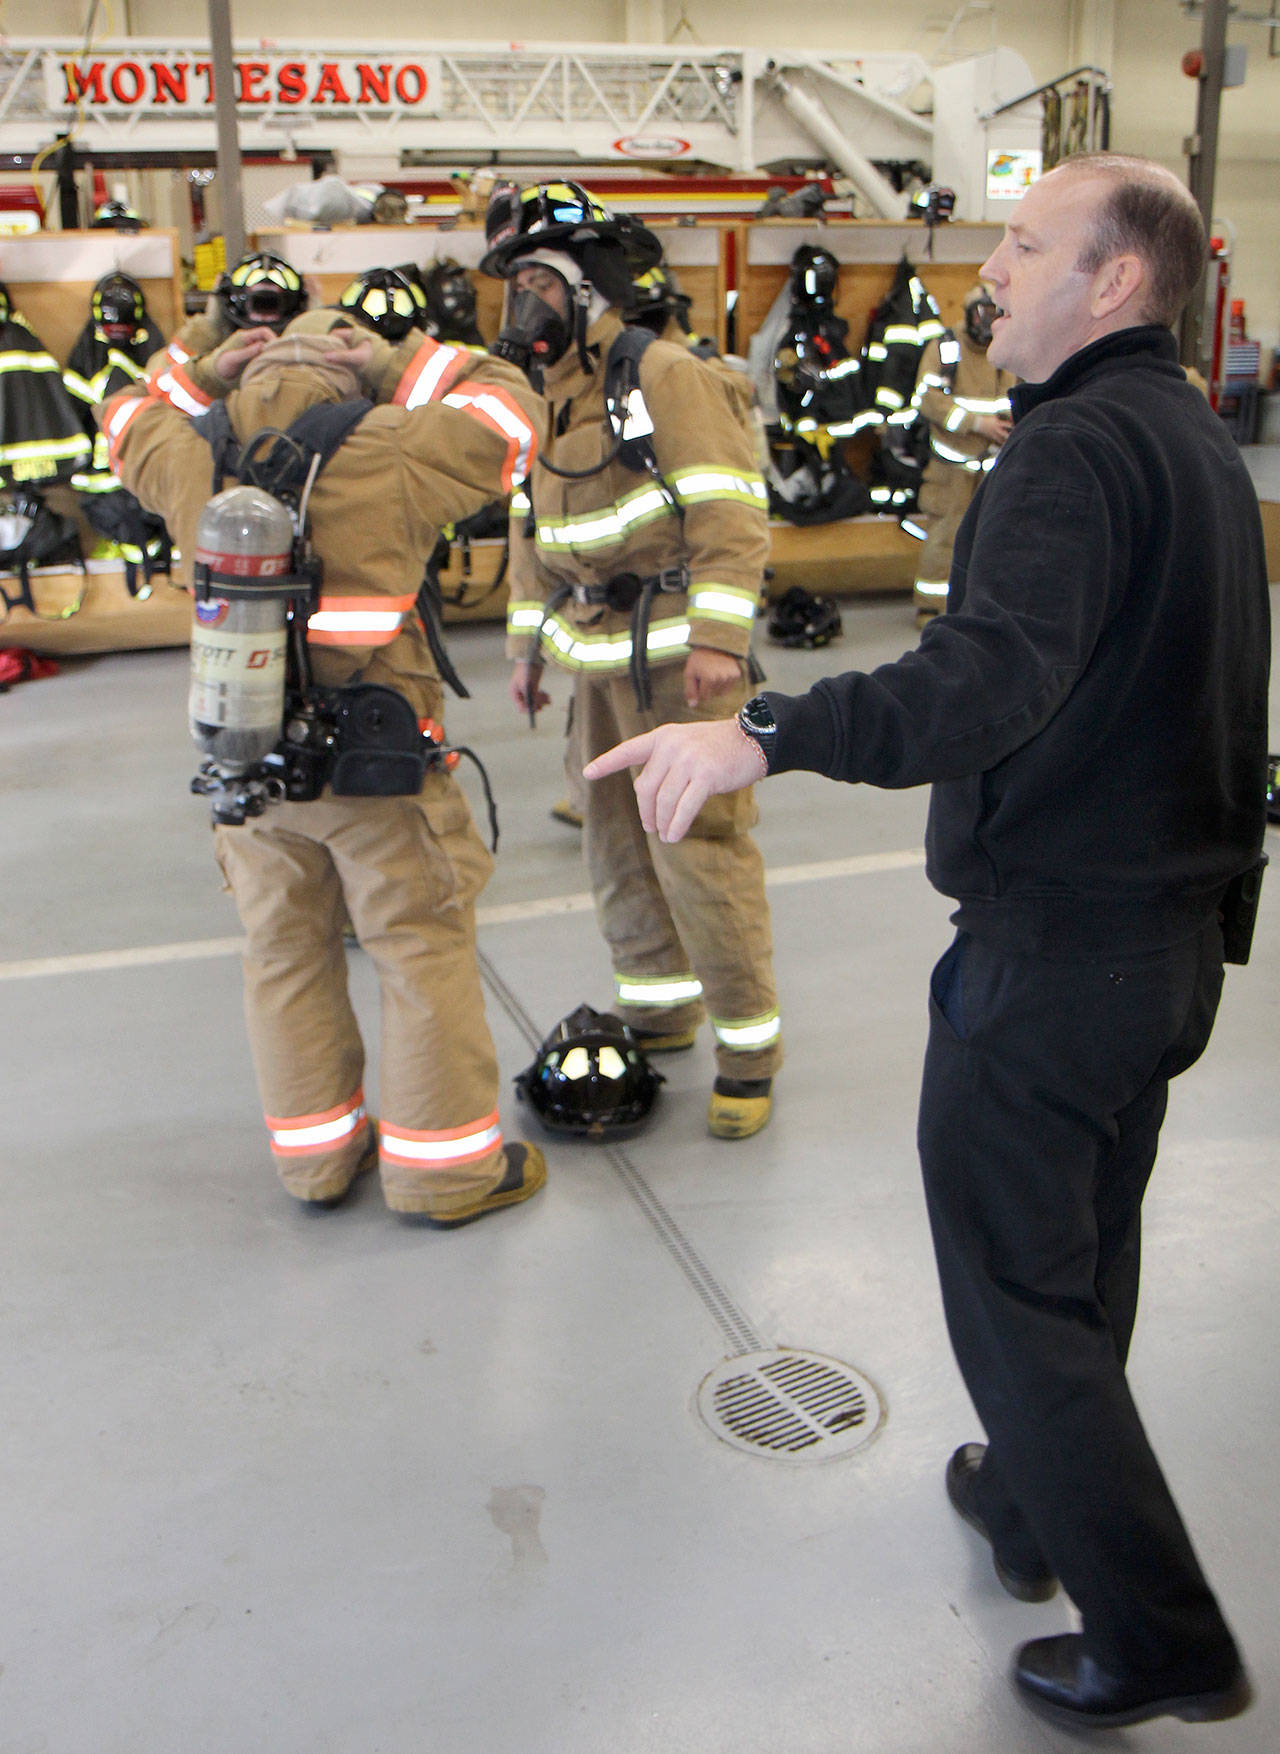 Michael Lang | Grays Harbor News Group                                Montesano Fire Chief Corey Rux instructs his students Thursday, Oct. 10, at the Montesano Fire Station, while Montesano High School senior Cole Daniels helps a fellow fire science student put on bunker gear.